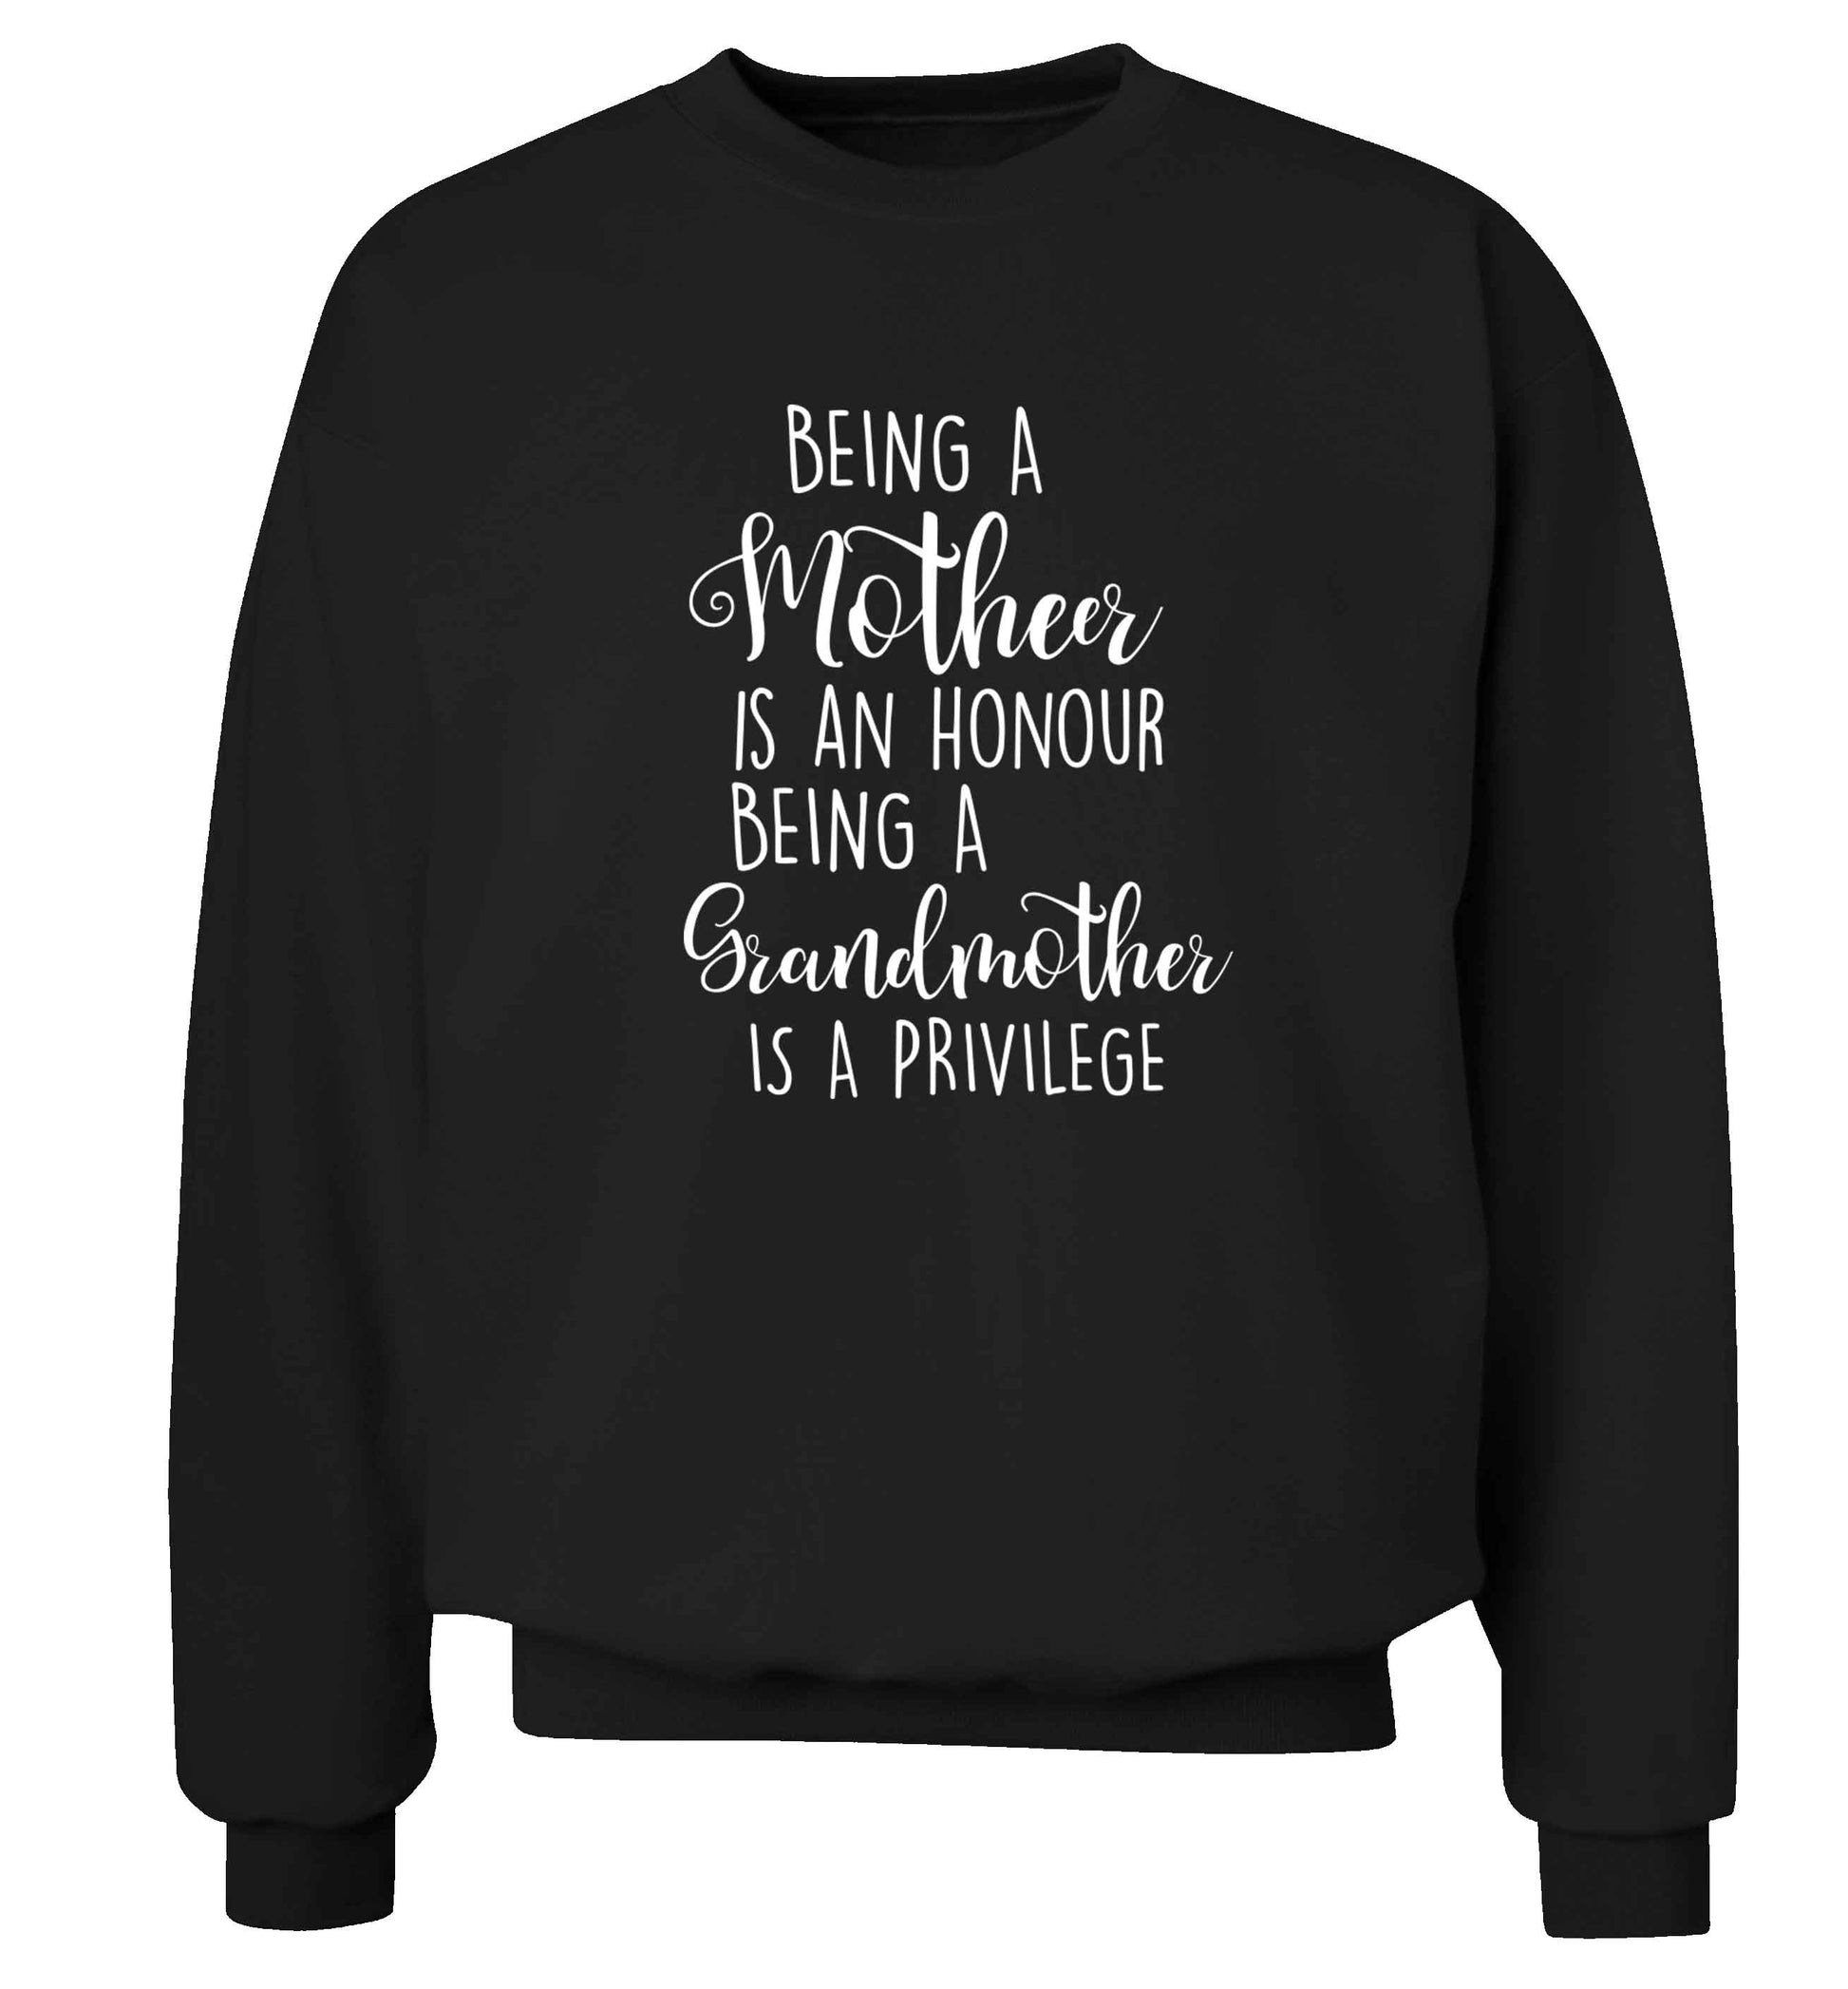 Being a mother is an honour being an grandmother is a privilege Adult's unisex black Sweater 2XL